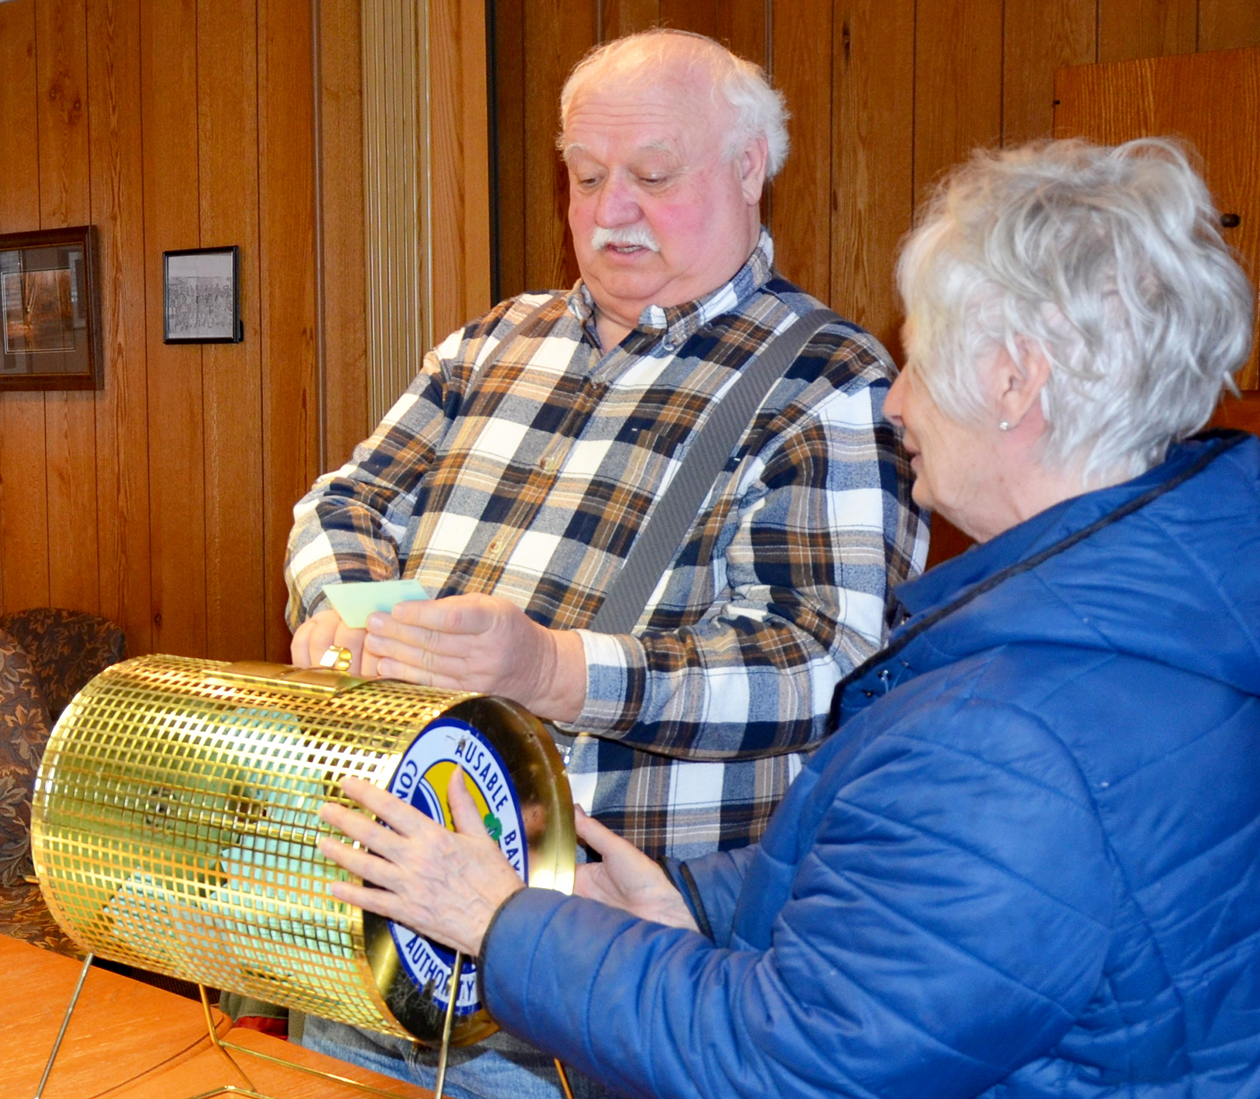 Conservation Dinner Committee members Charles Miner and Marcy Merner drew the winning ticket at the February 10, 2020 Dinner Committee meeting.